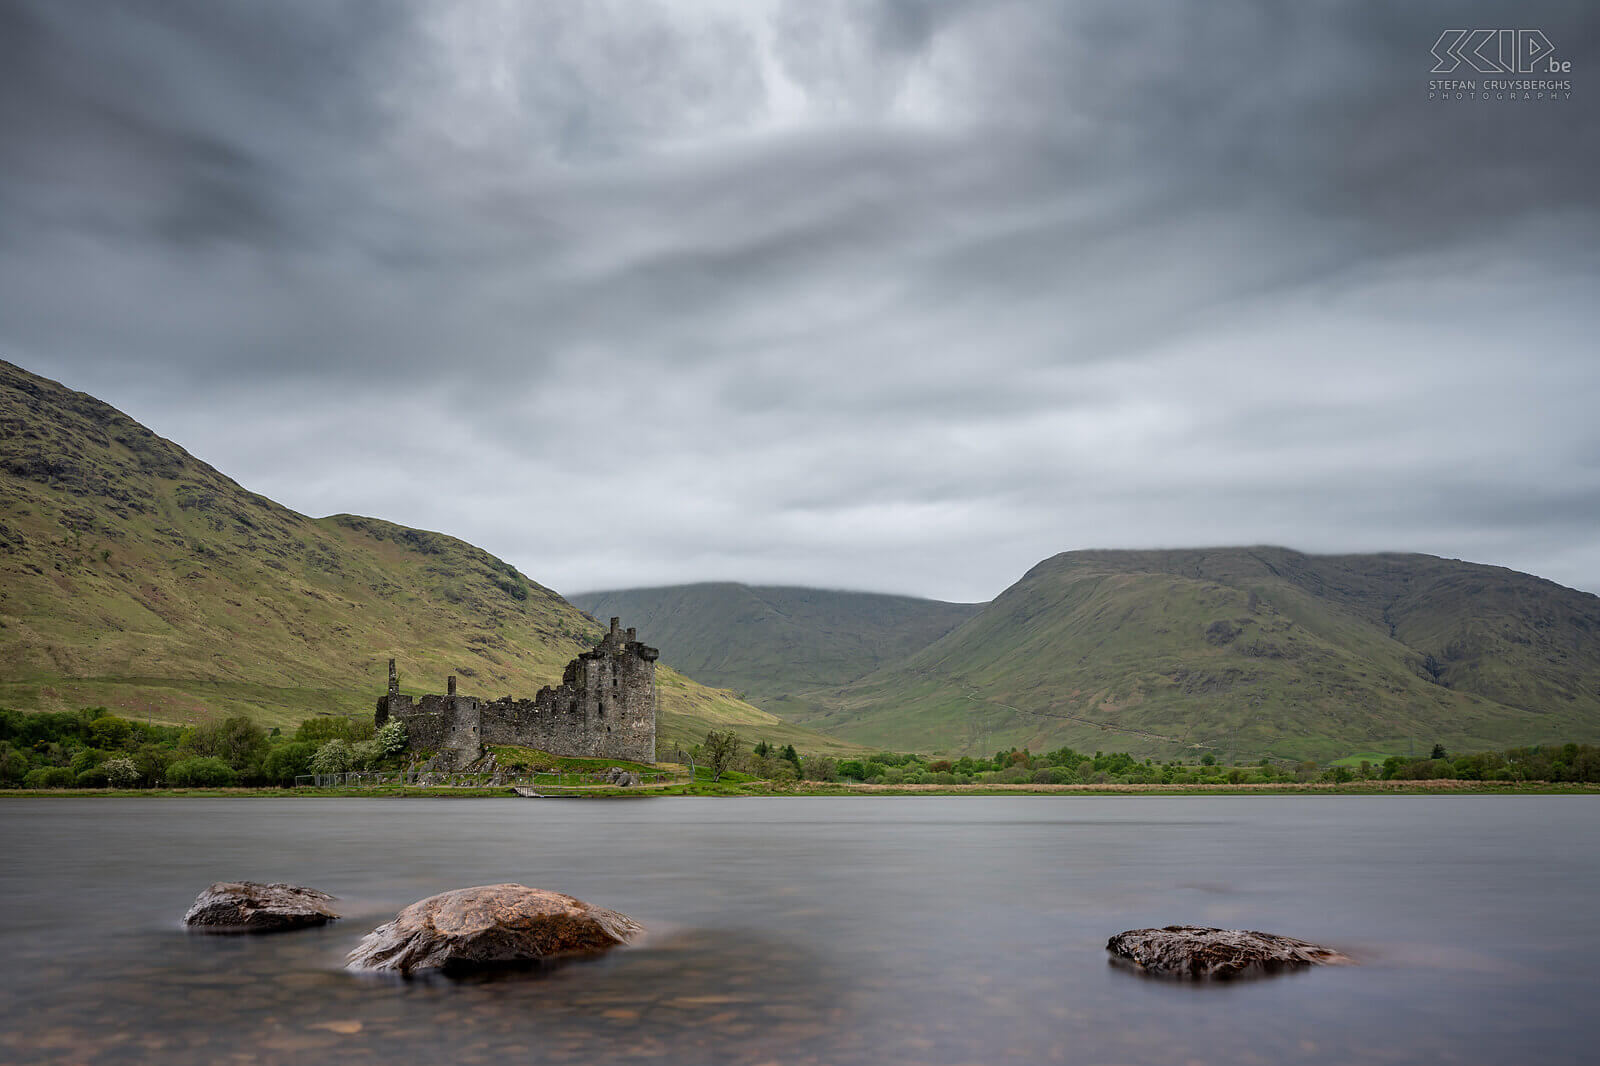 Kilchurn Castle The ruins of the 15th century Kilchurn Castle on the northeast bank of Loch Awe. Stefan Cruysberghs